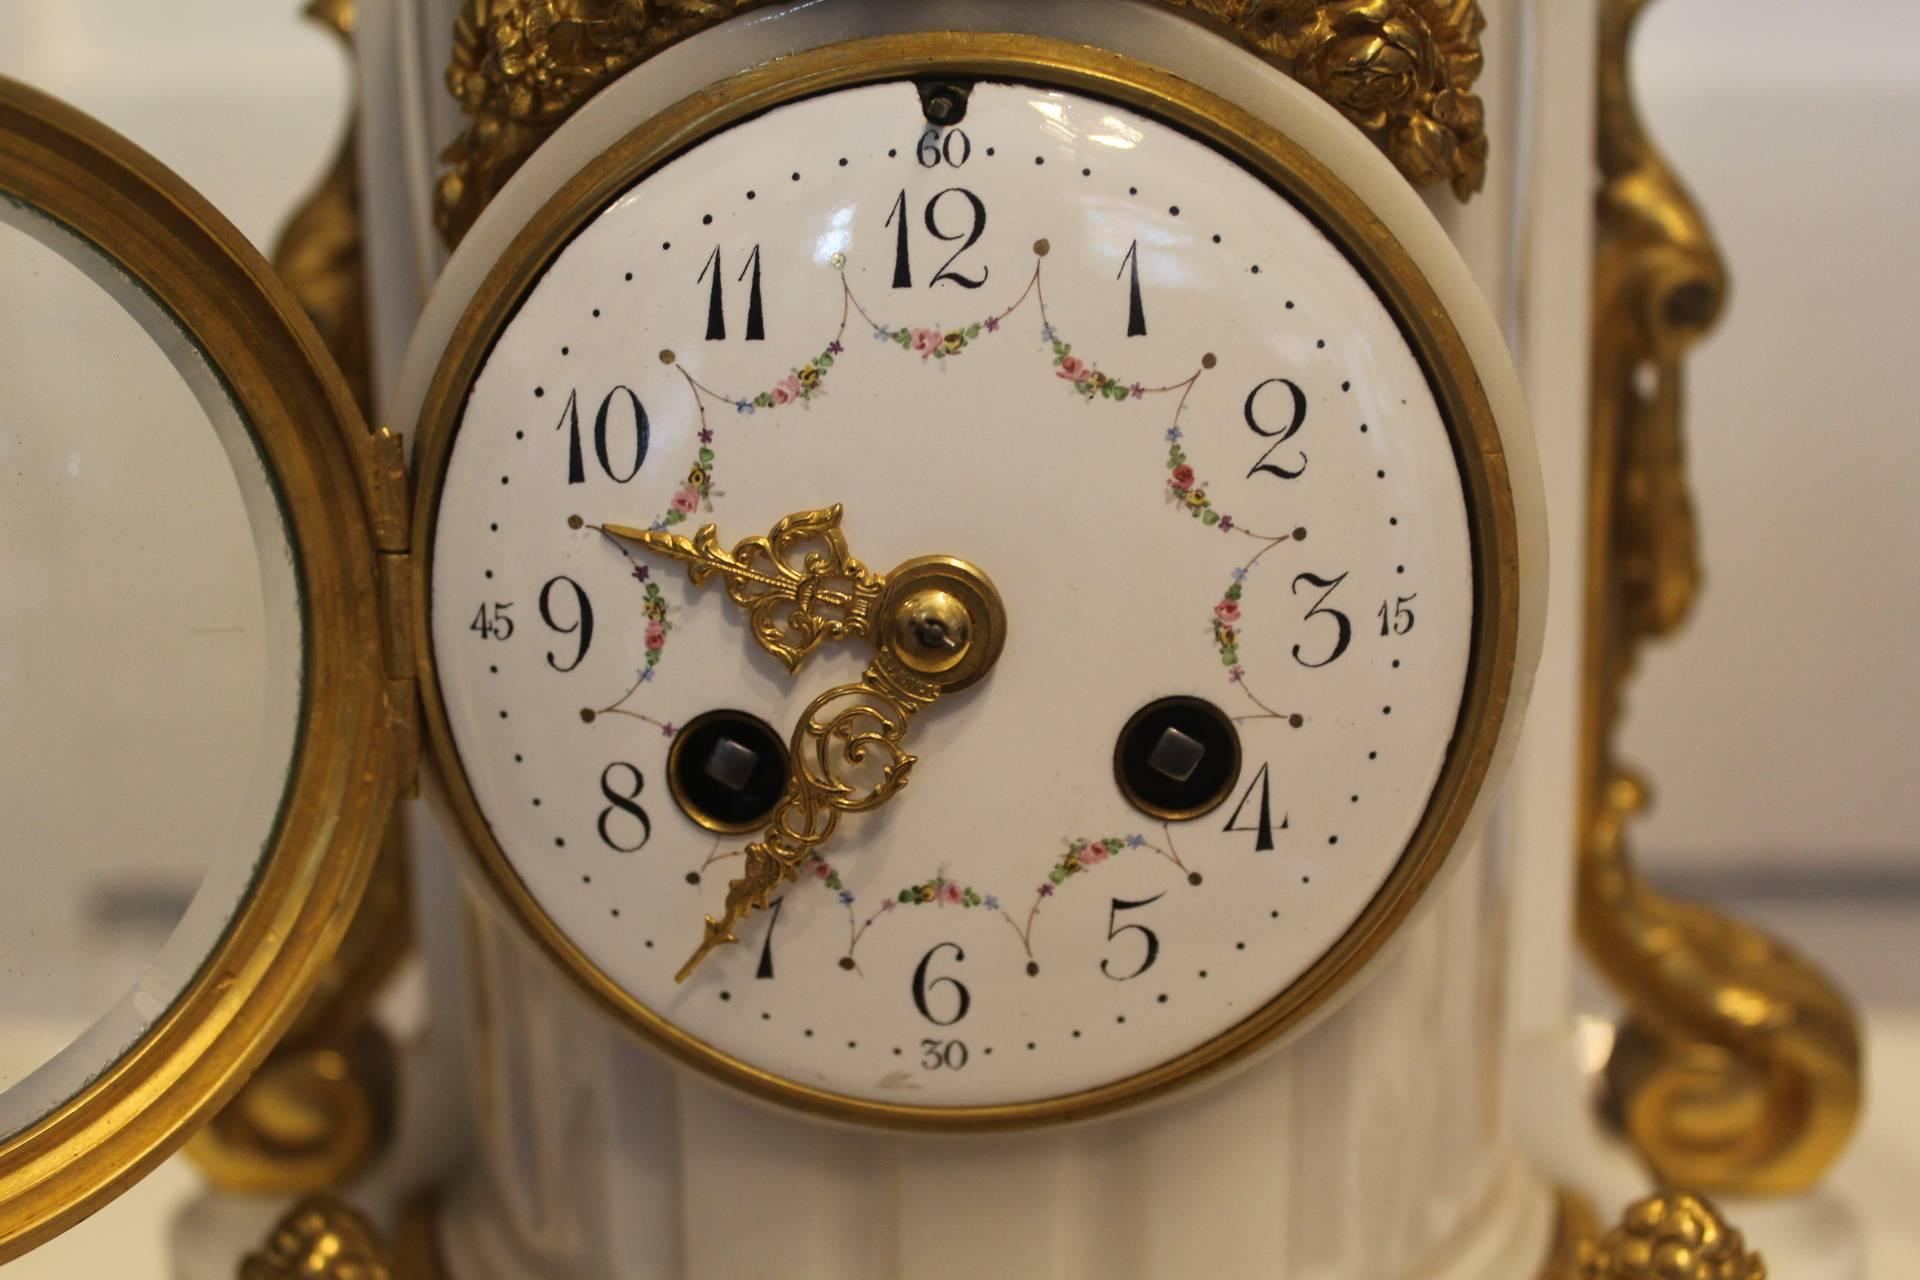 Beautiful white marble clock set by A.D.Mougin, Paris, circa 1900

This three-piece clock set is in wonderful condition with elegant ormolu mounts featuring ribbons, rose garlands, delicate beading and pineapples. The clock is surmounted by two